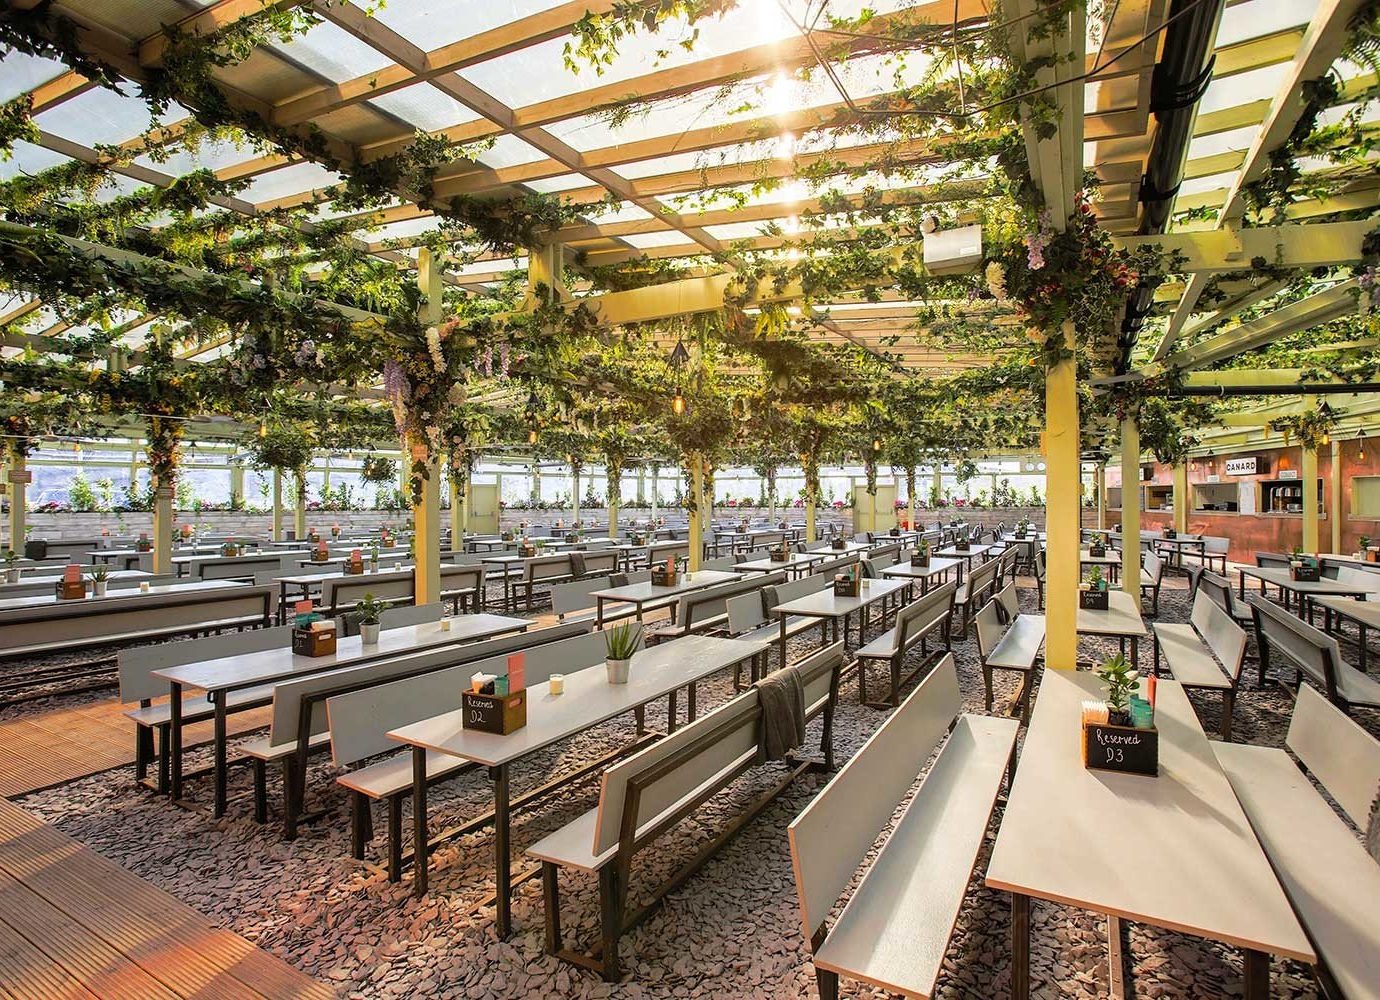 tree plant Pergola on the roof social hangout people summer